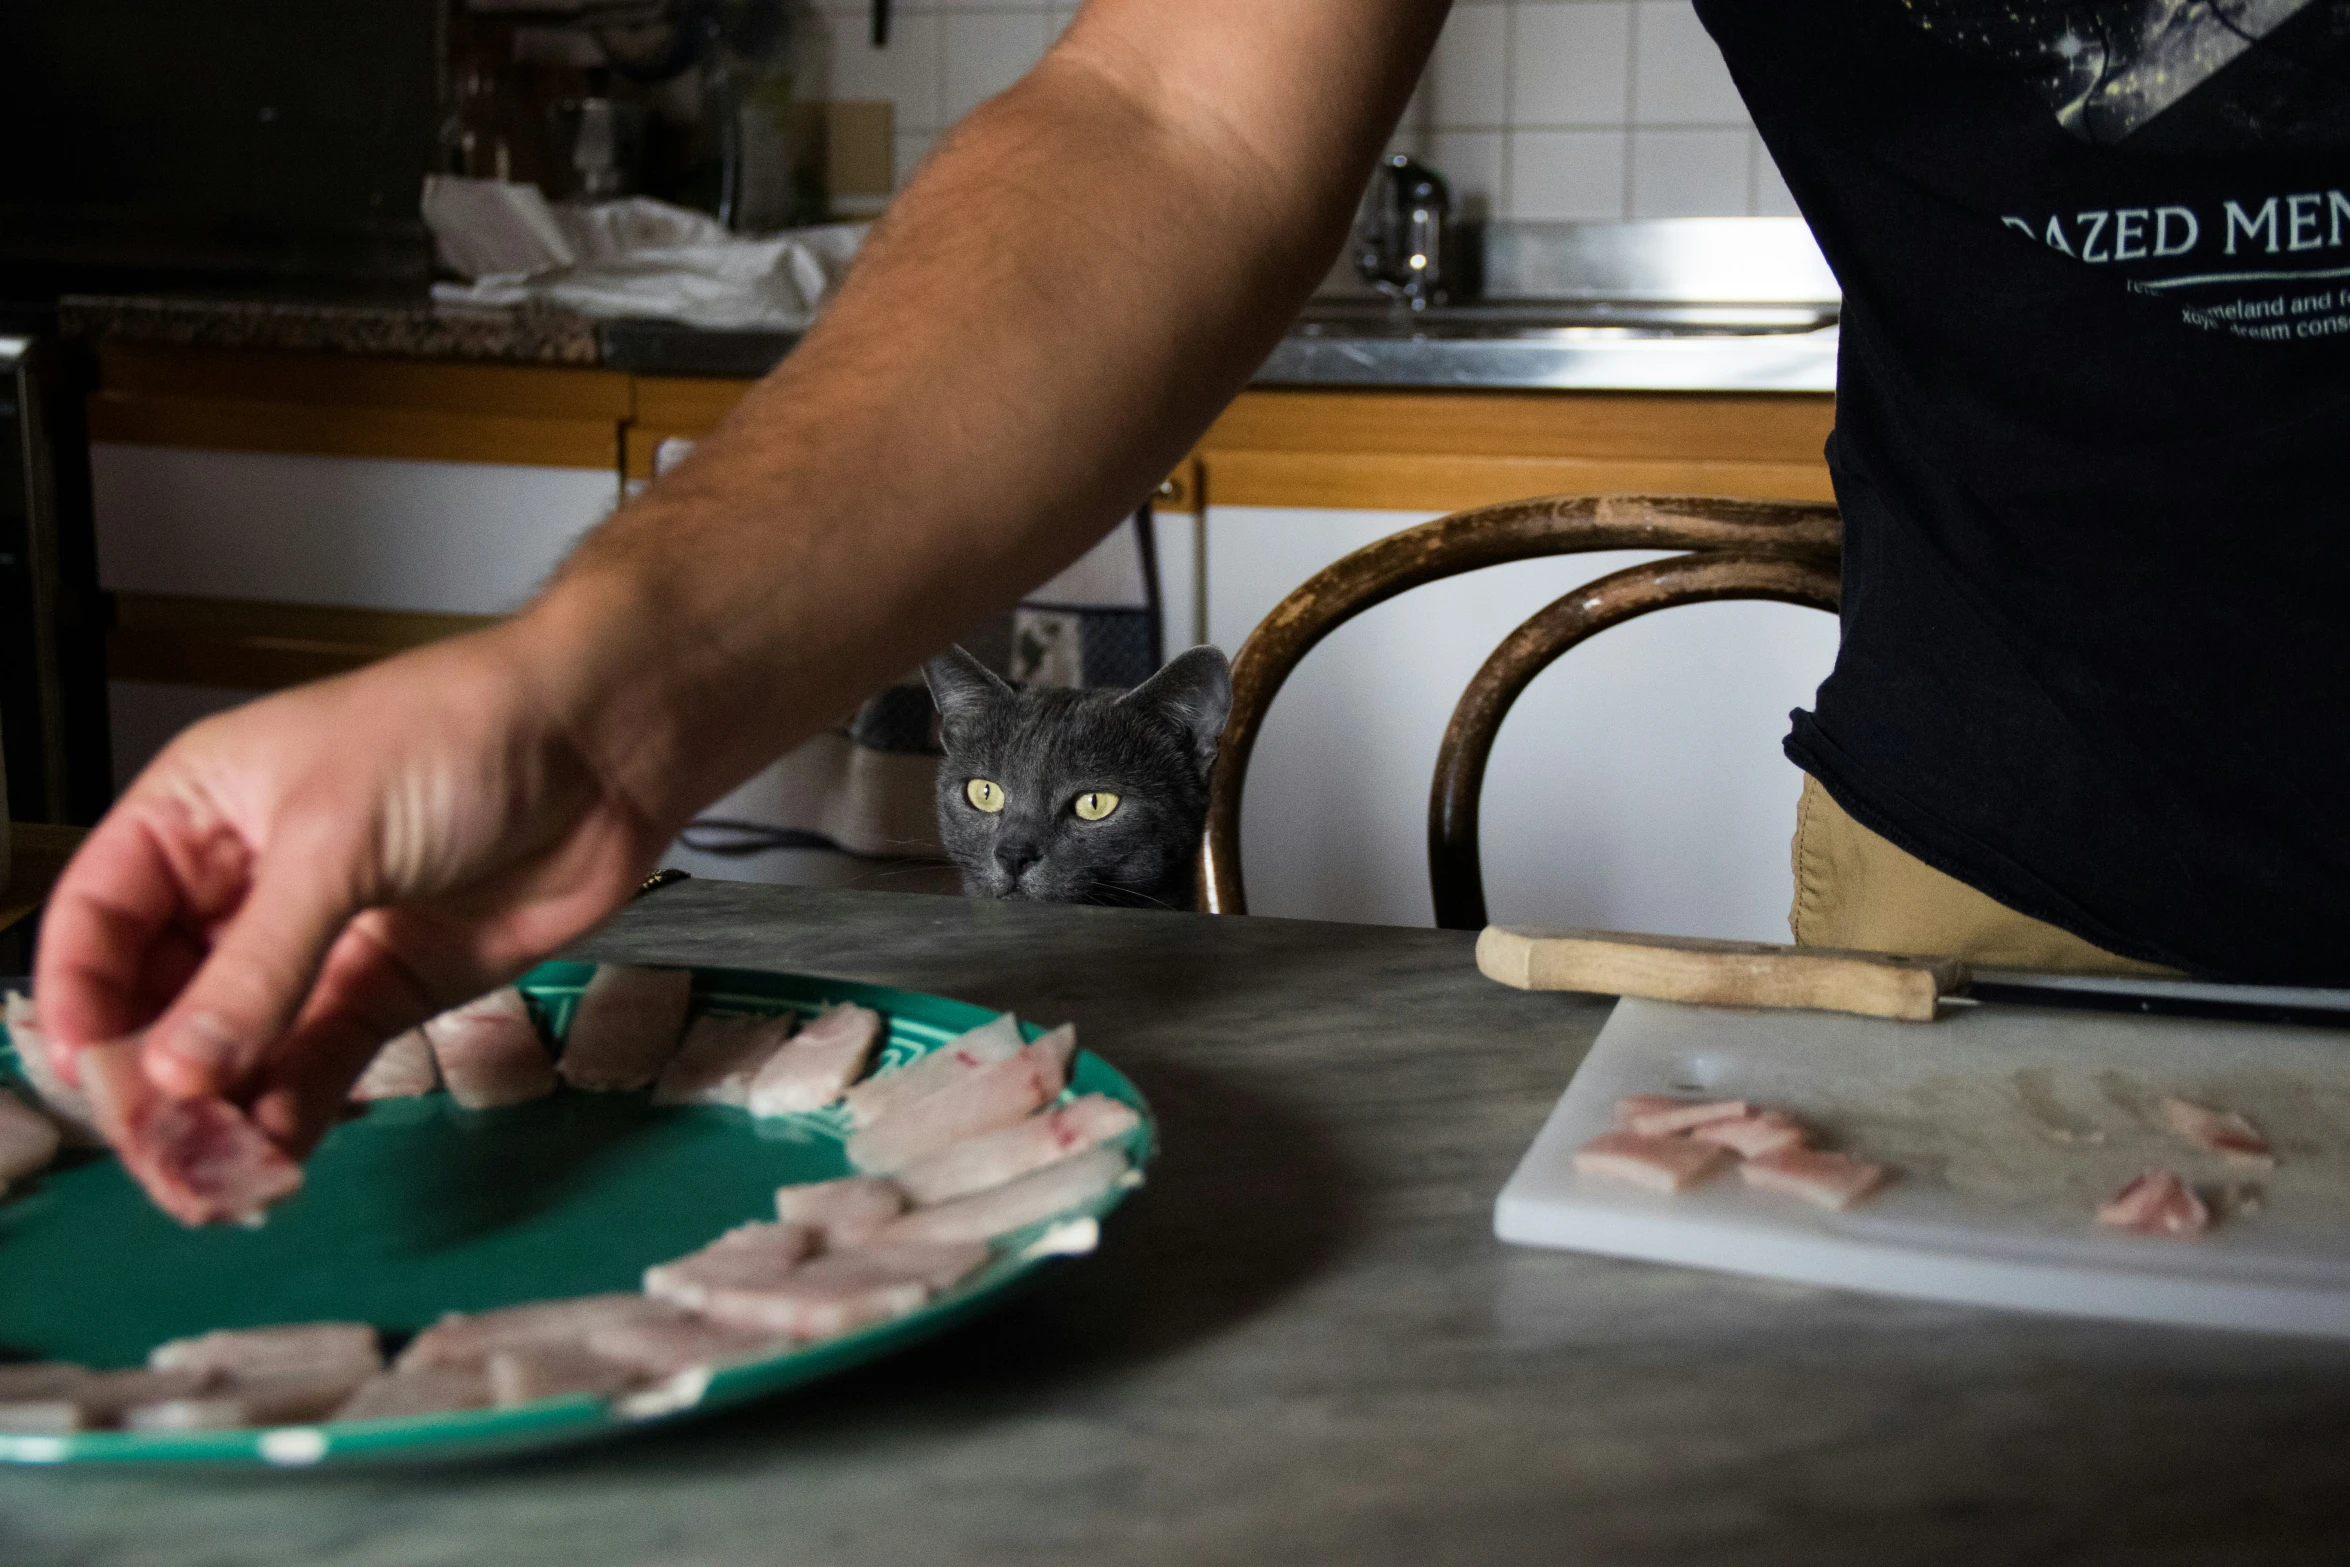 a person puts meat on a plate next to a cat